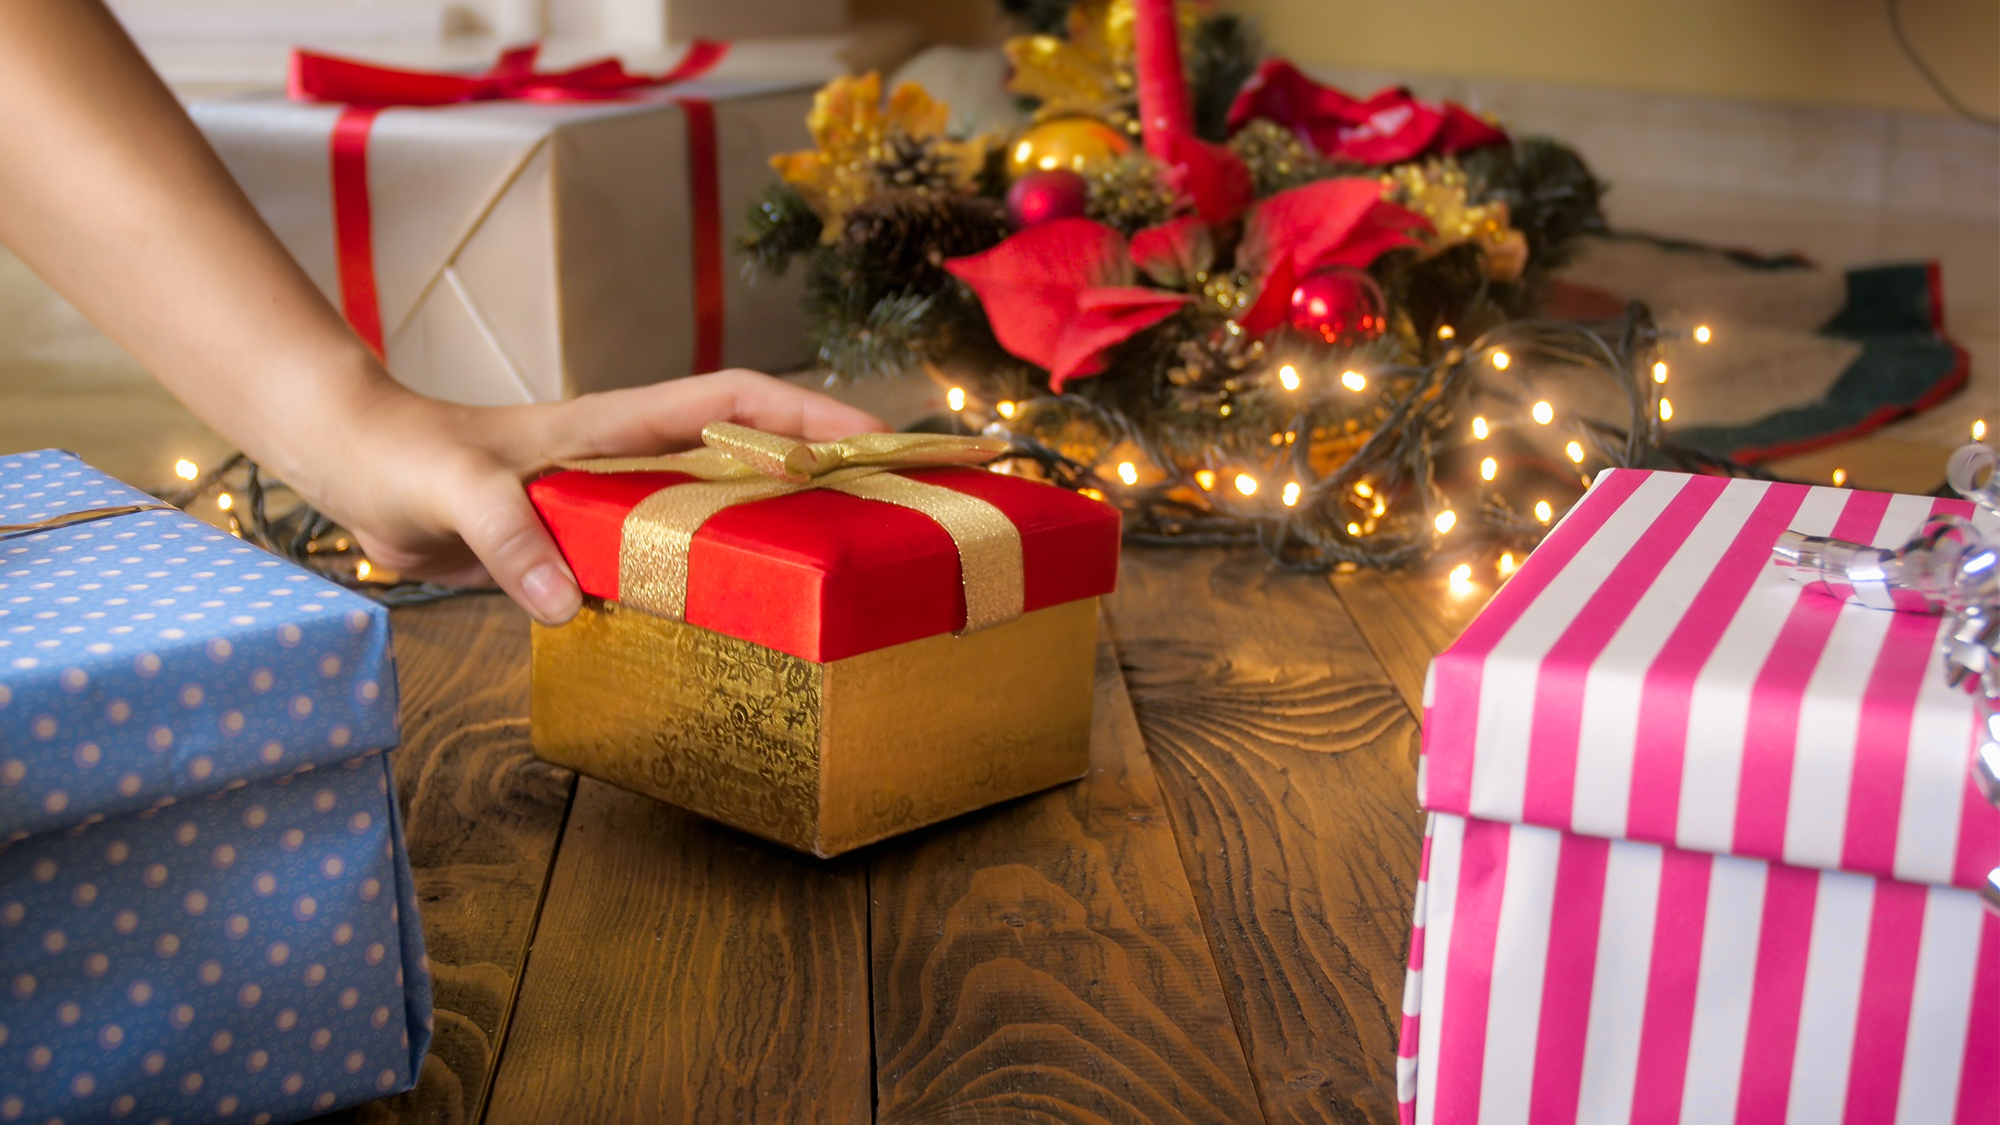 A hand reaches for a present wrapped in red and gold wrapping paper underneath a Christmas tree.